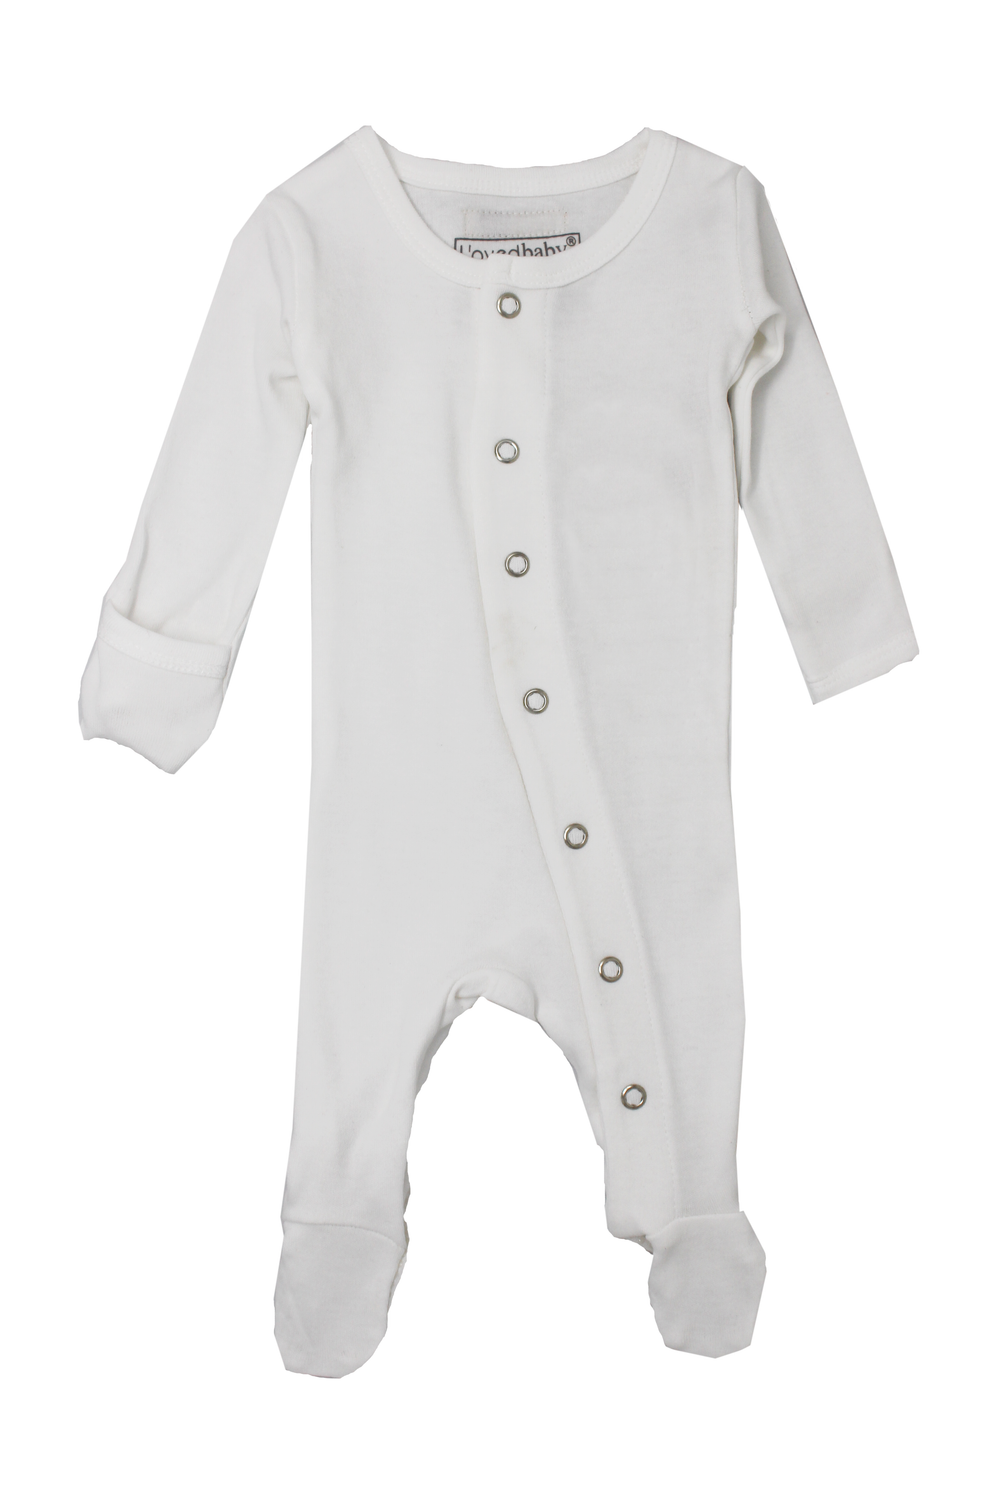 Organic Snap Footie in White